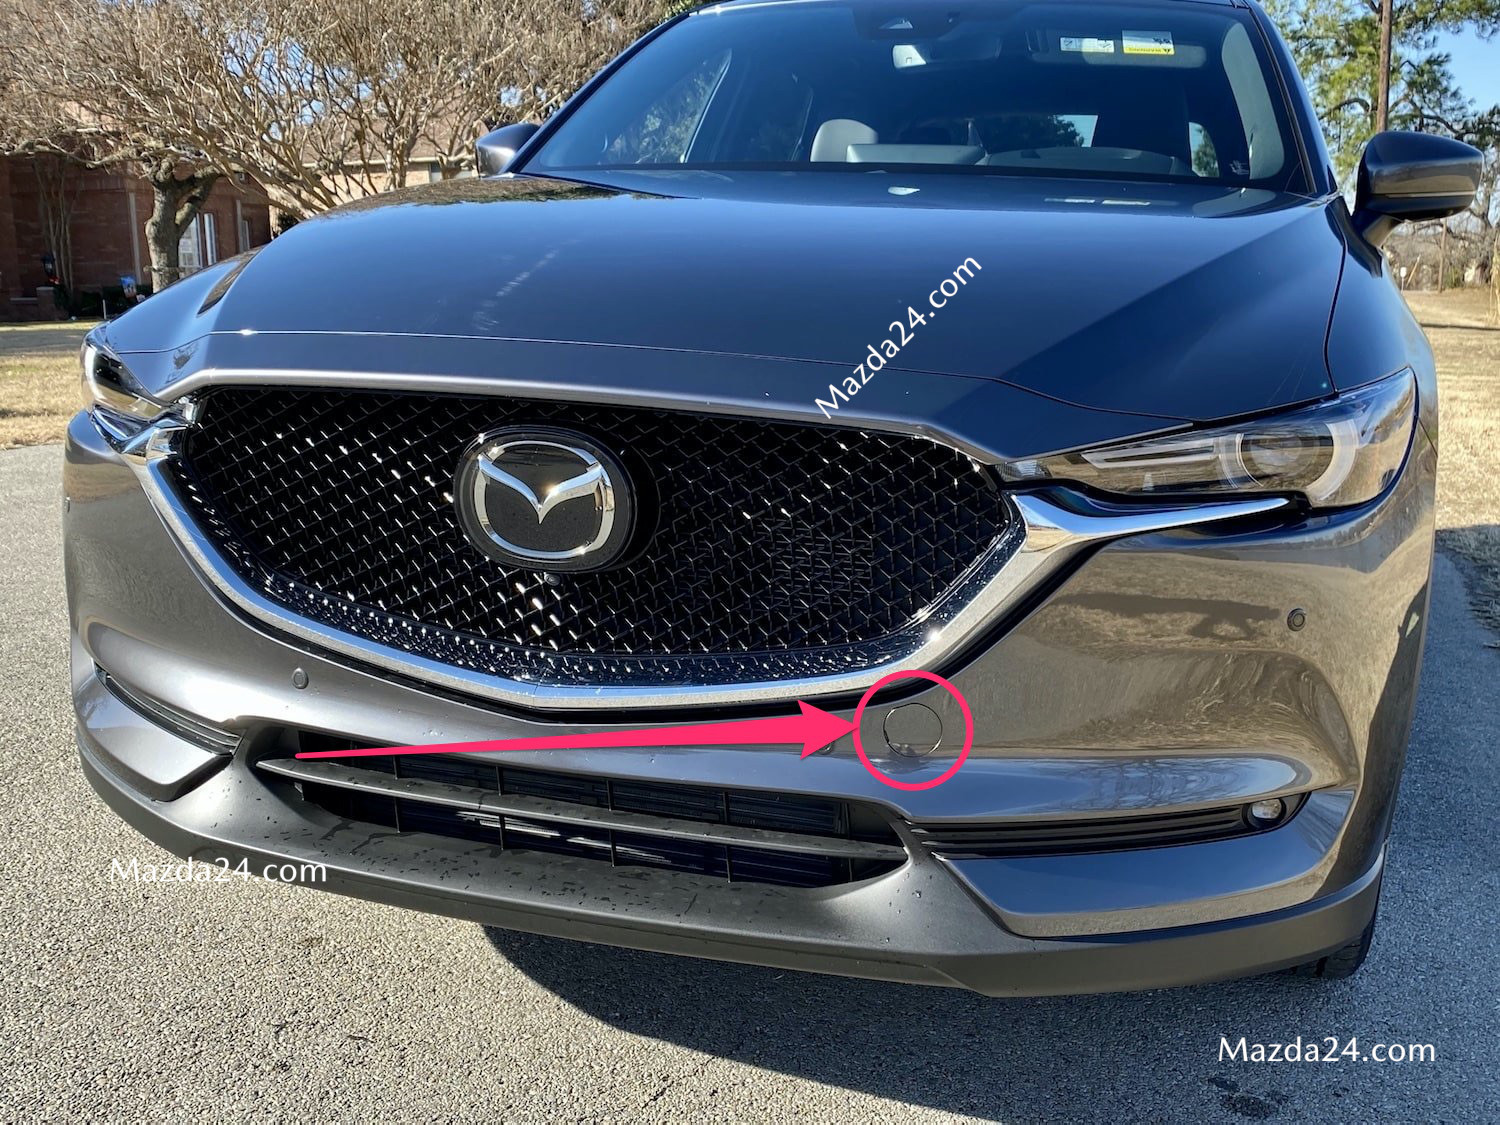 Mazda CX-3 front bumper tow hook cover